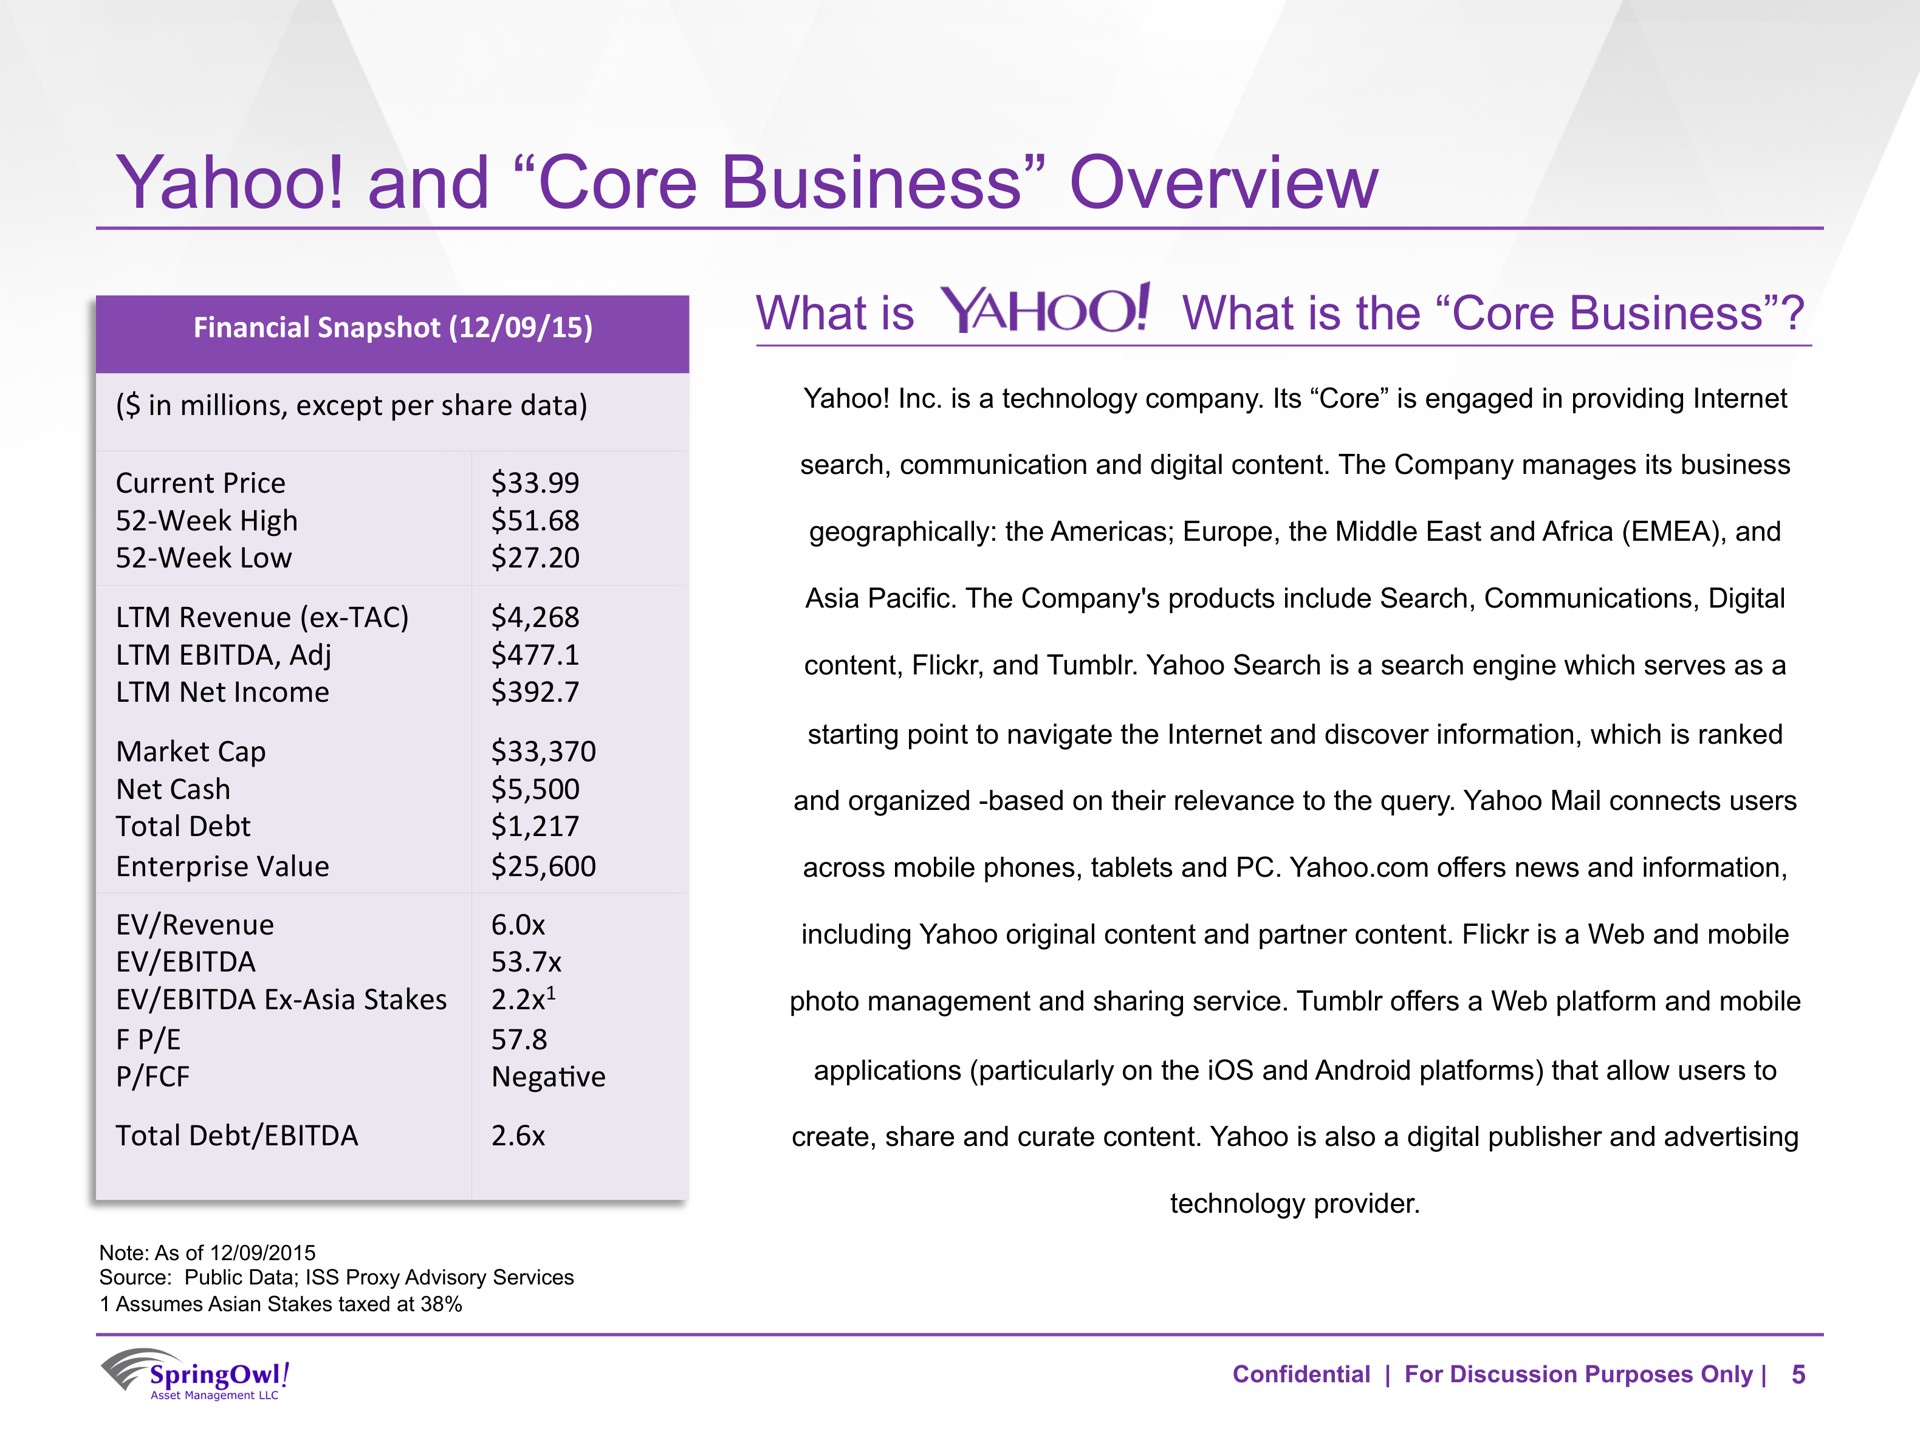 yahoo and core business overview | SpringOwl